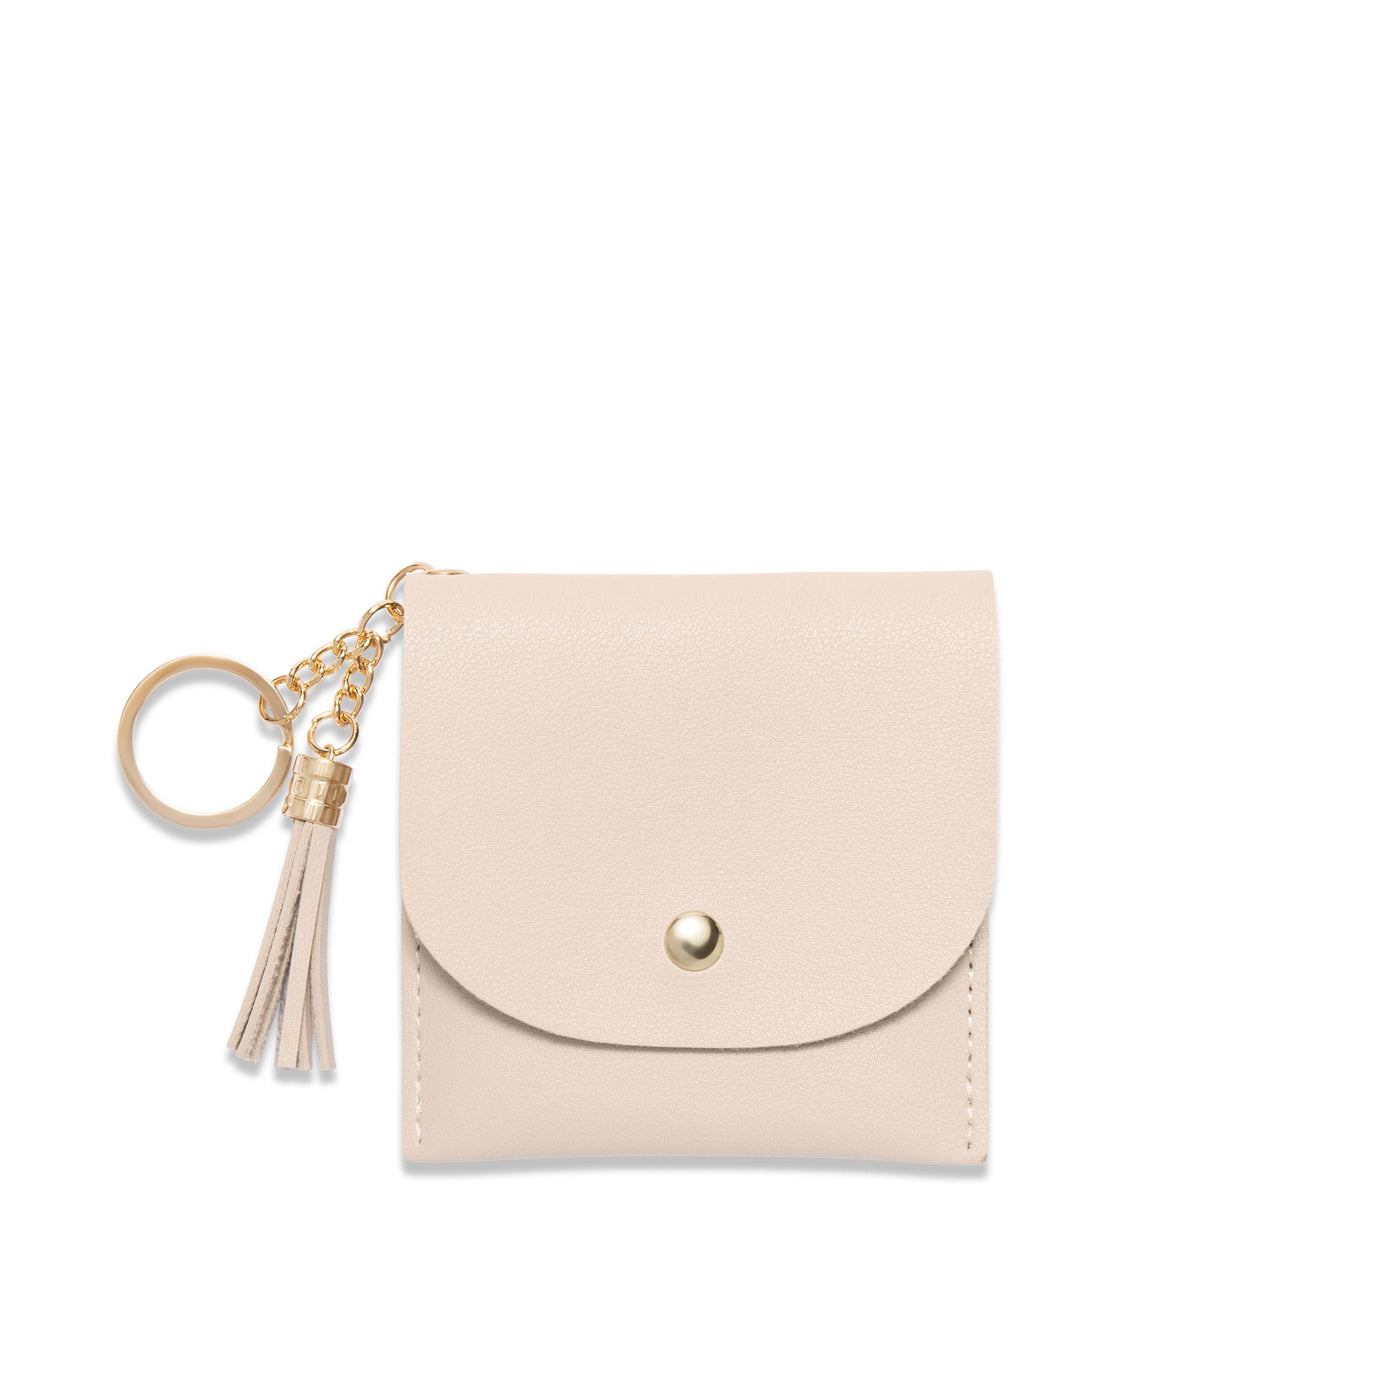 Lark and Ives / Vegan Leather Accessories / Small Accessories / Wallet / Mini Wallet / Card Case / Card Holder / Button snap closure / Flap Wallet / Card Purse with Gold Button and Keyring / Cream Shade